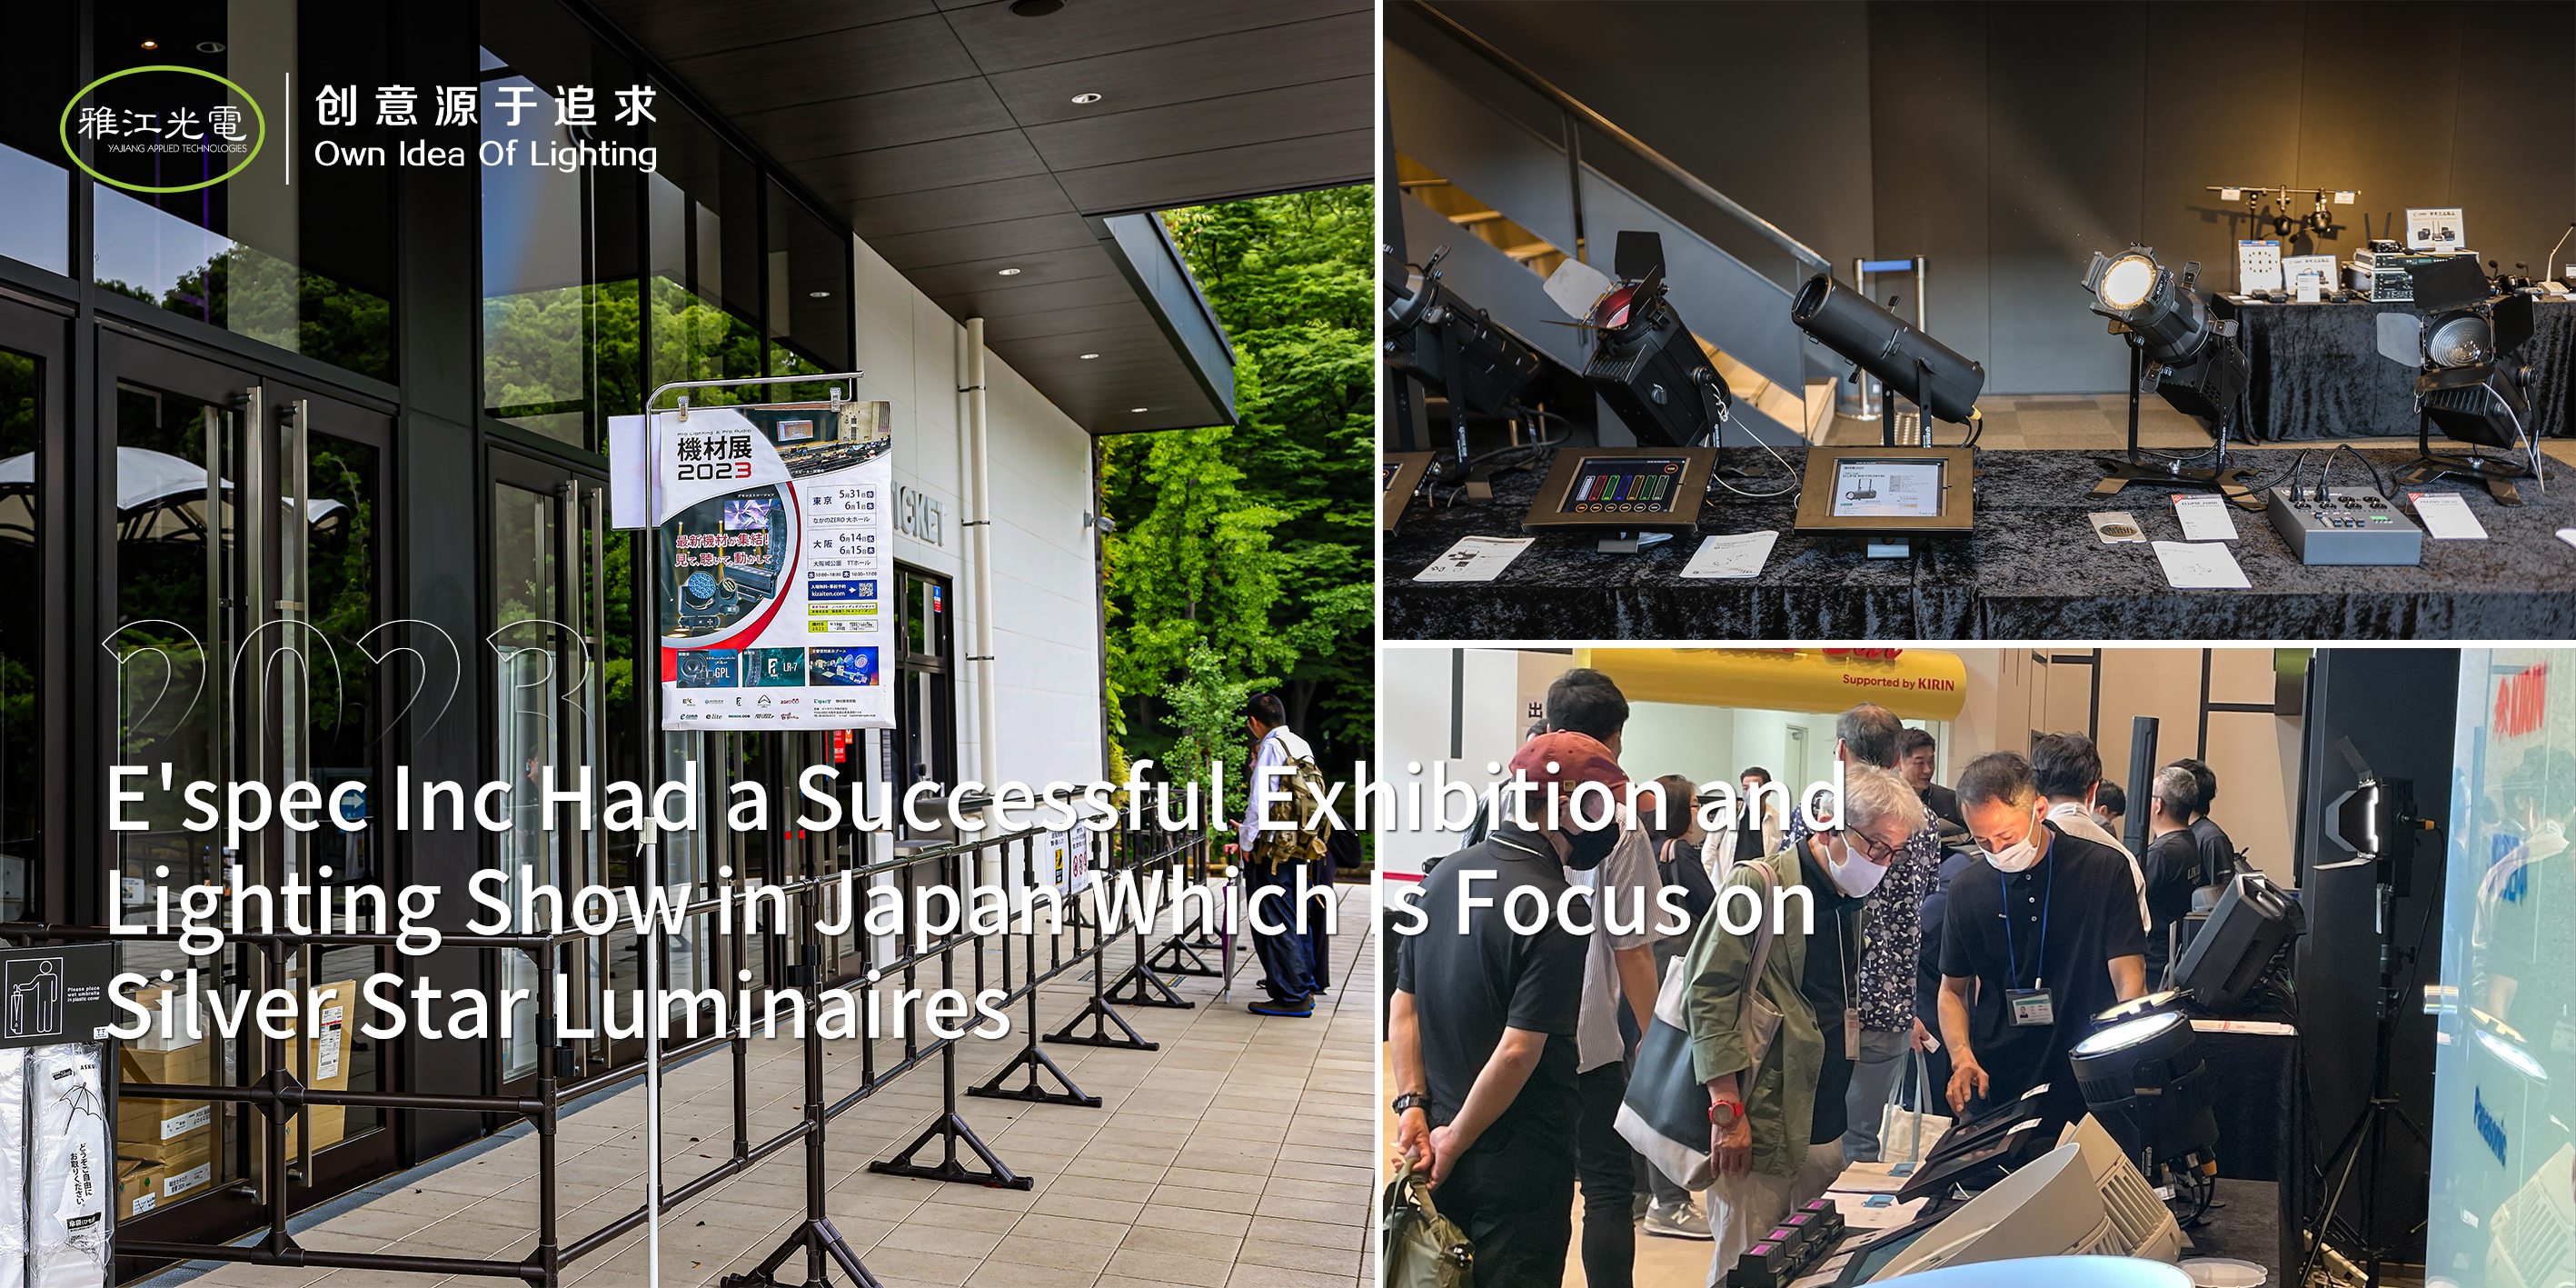 E'spec Inc Had a Successful Exhibition and Lighting Show in Japan Which Is Focus on Silver Star Luminaires